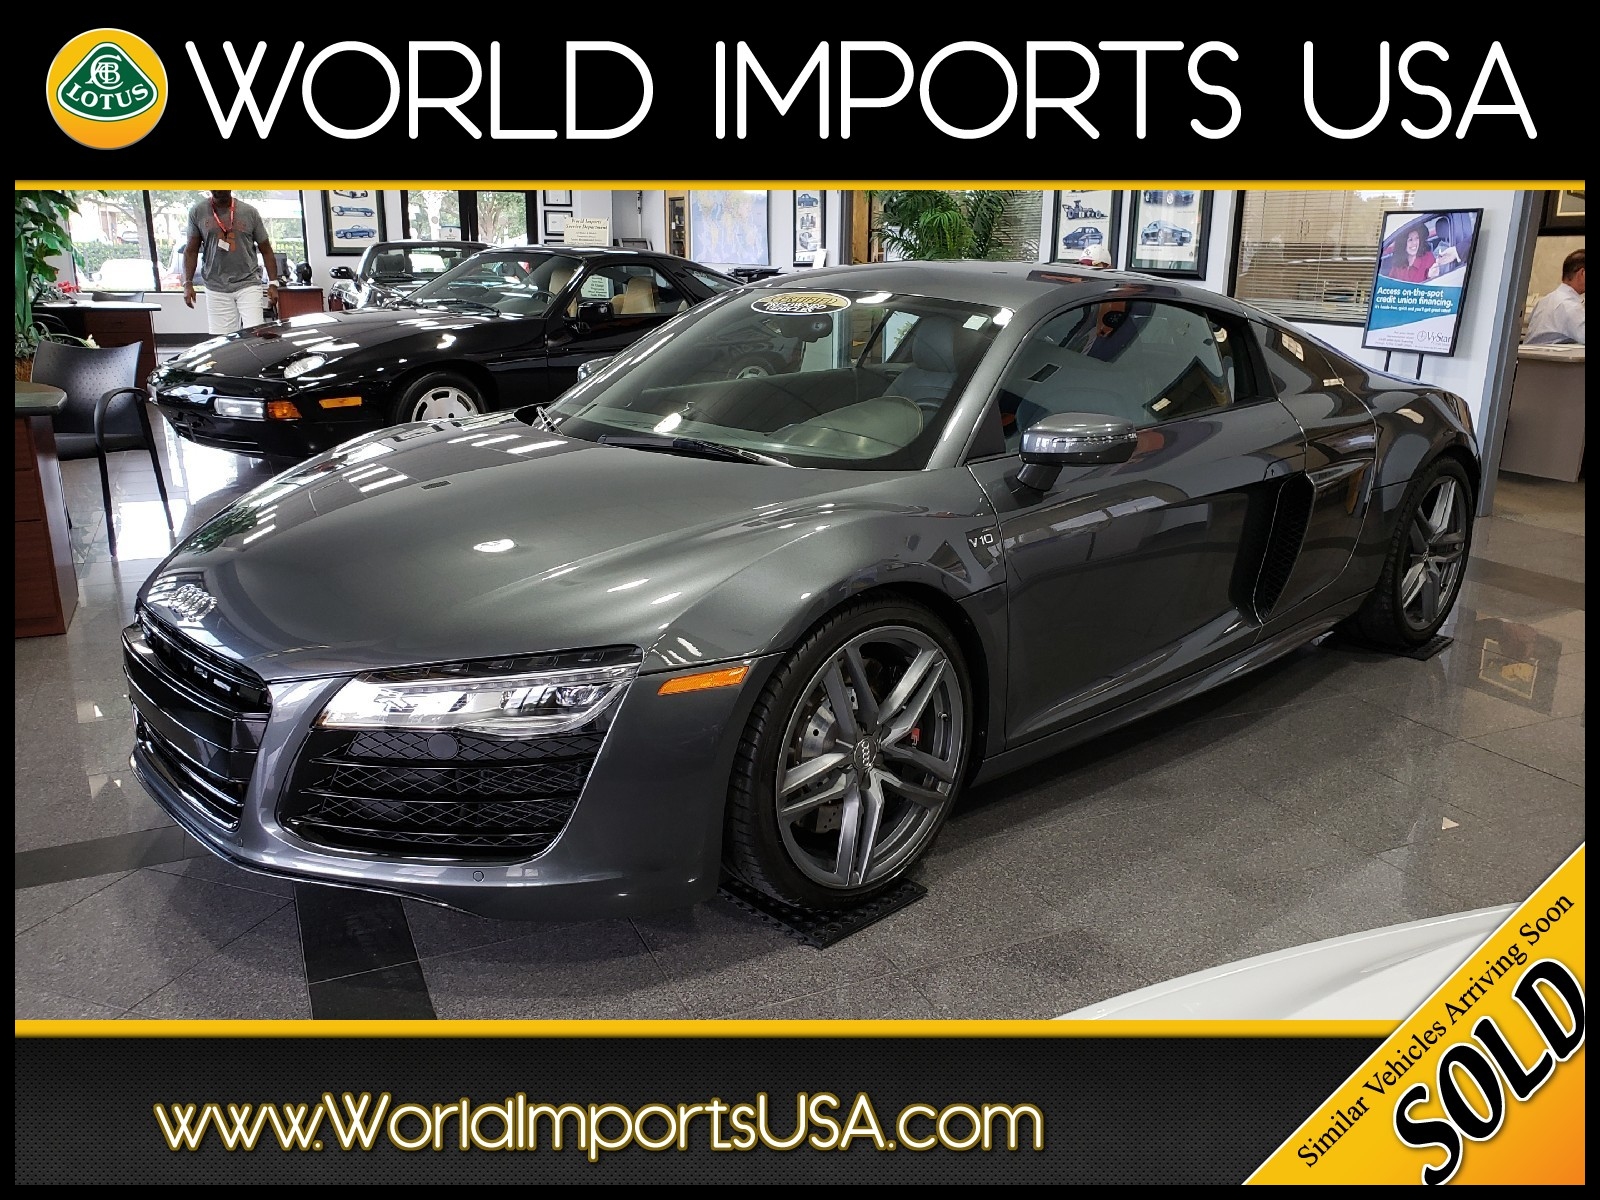 Used 2014 Audi R8 V10 Coupe Msrp $175 950 00 For Sale in Jacksonville FL World Imports USA Serving San Marco Ponte Vedra Beach & Palm Valley